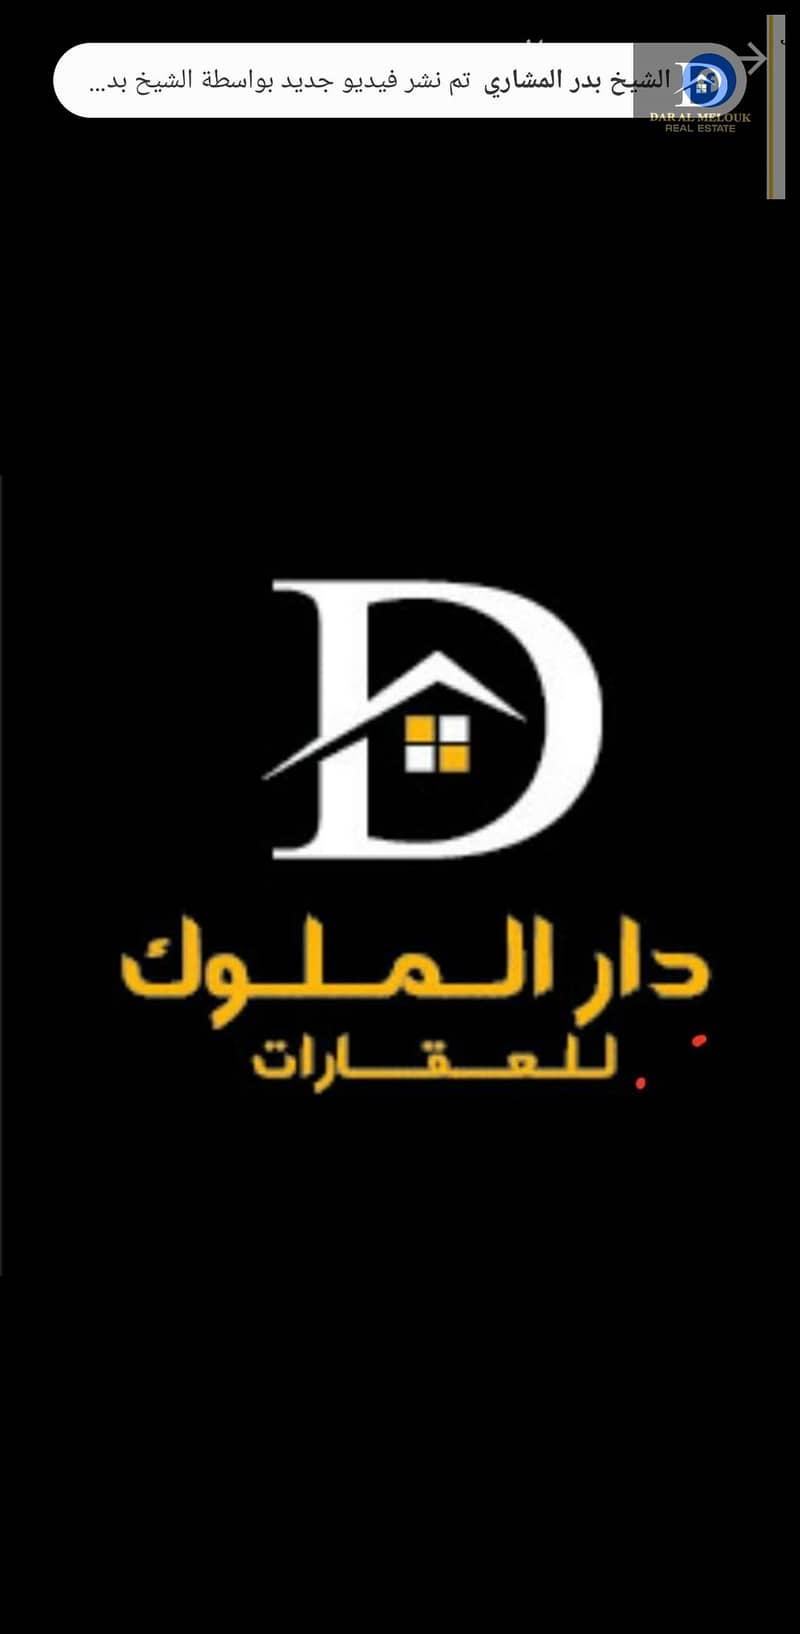 For sale in Sharjah, Al-Hoshi area, residential and investment land, area of ​​10,000 feet, a permit for a ground and first villa, and two attached villas are declared. Excellent location, close to Maliha Street, the second piece of the main street. The A